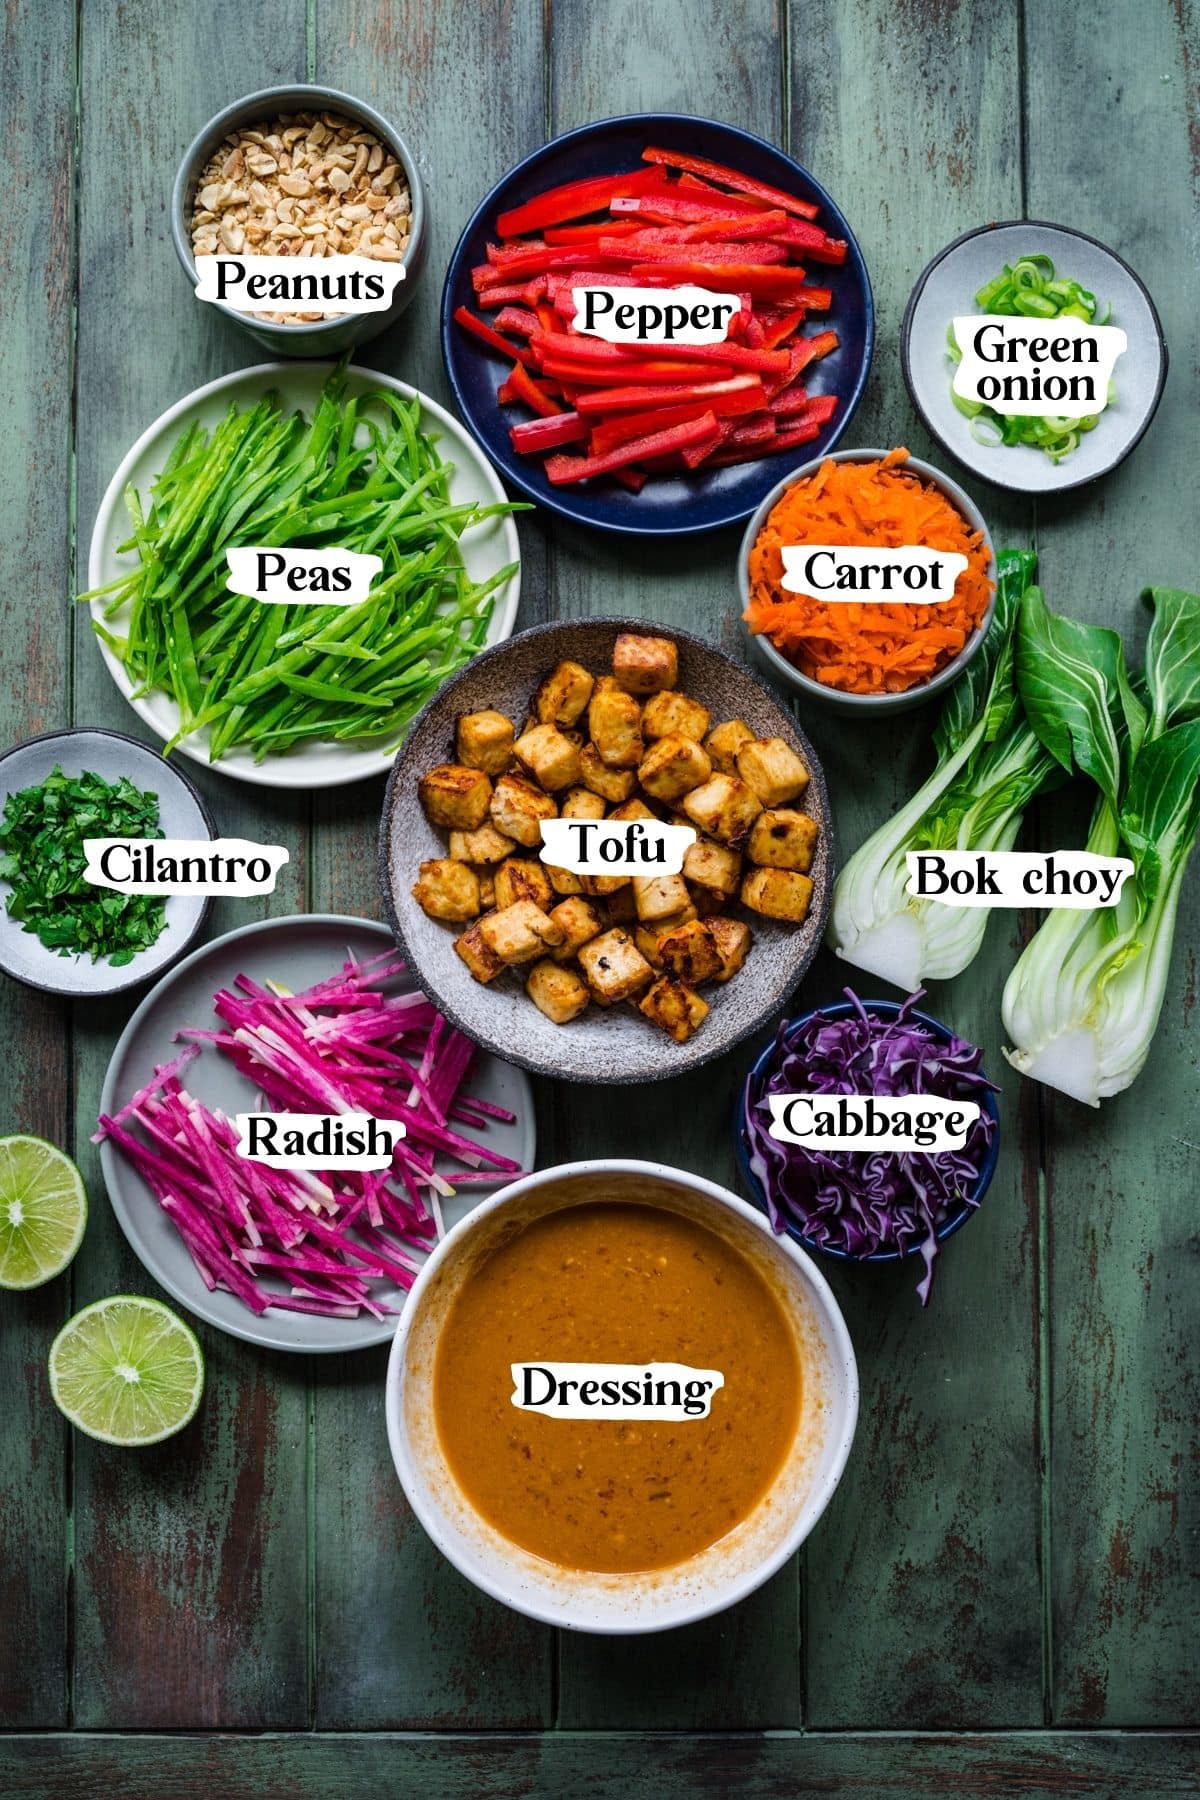 Overhead view of thai salad ingredients, including carrots, peas, peppers, tofu, and green onions.